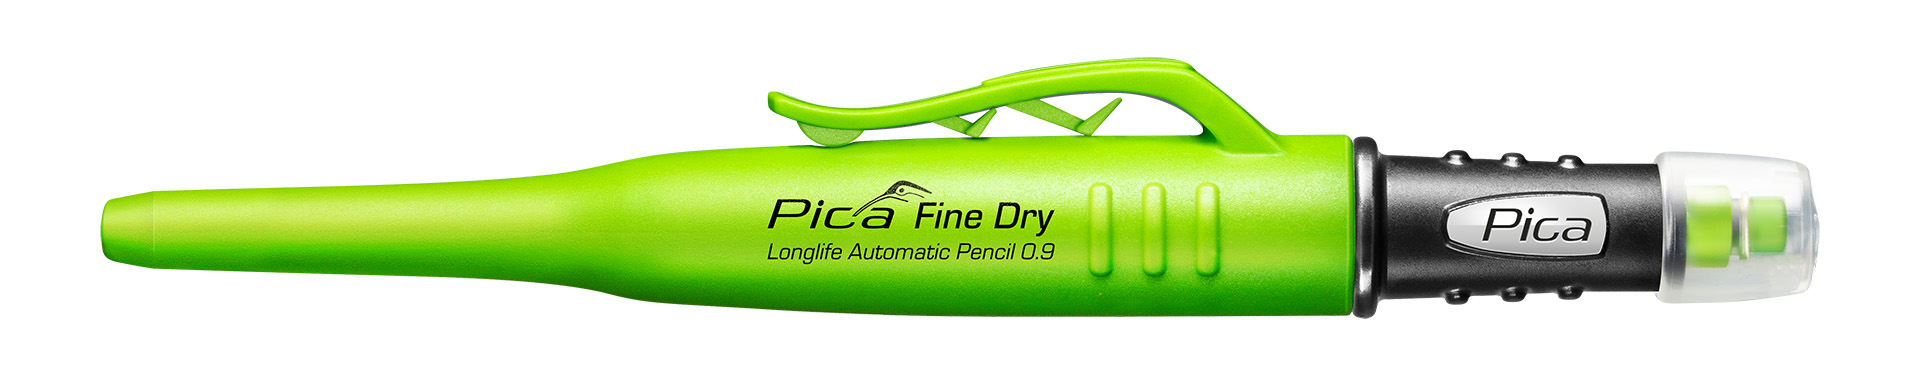 Picture of Pica Dry Longlife Automatic Pencil